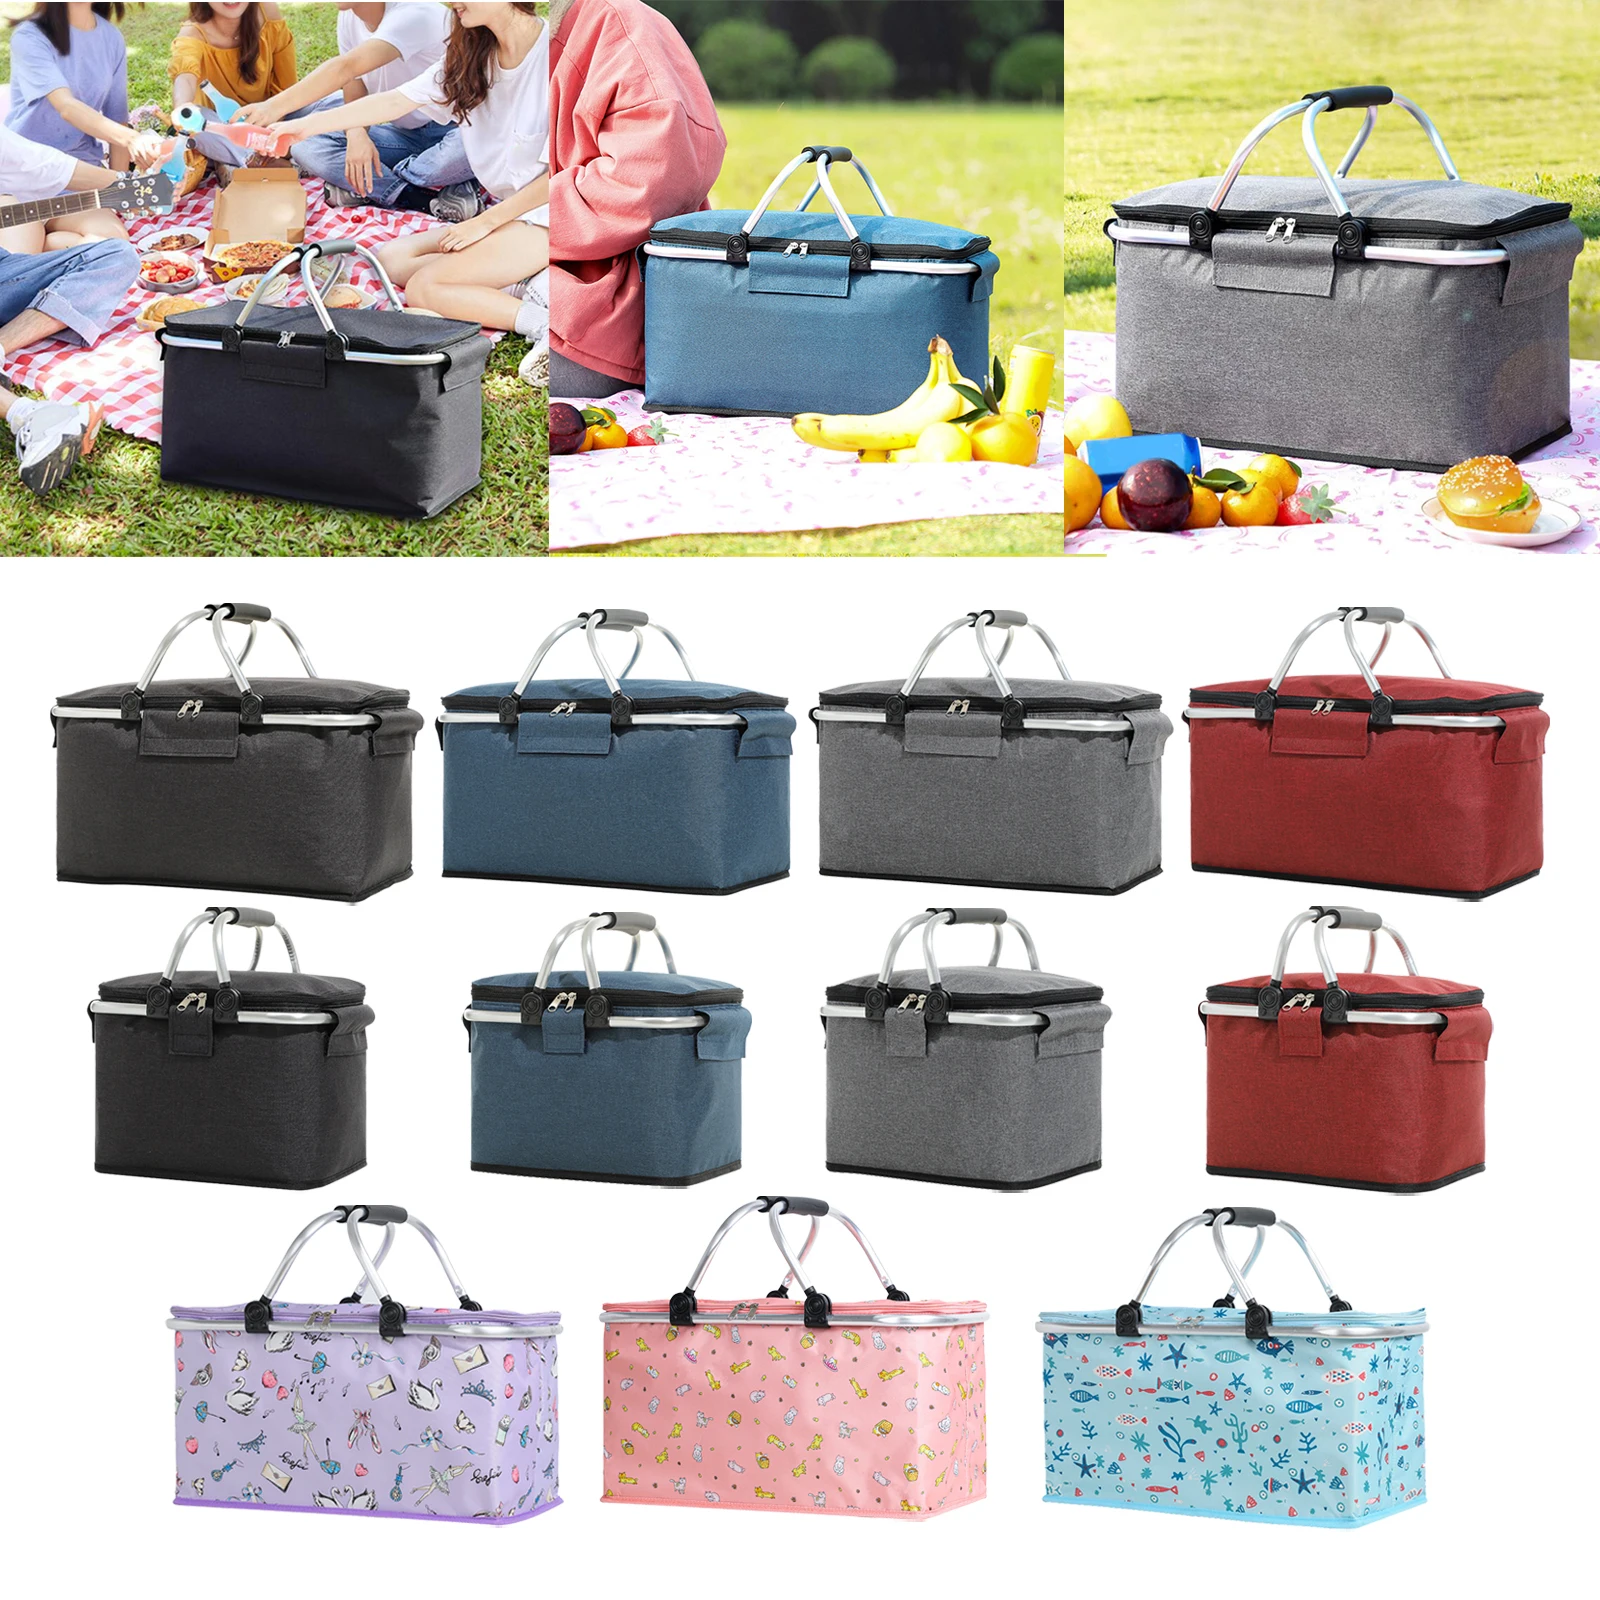 Insulated Cooler Picnic Basket for Adult Men Women Folding Container Store